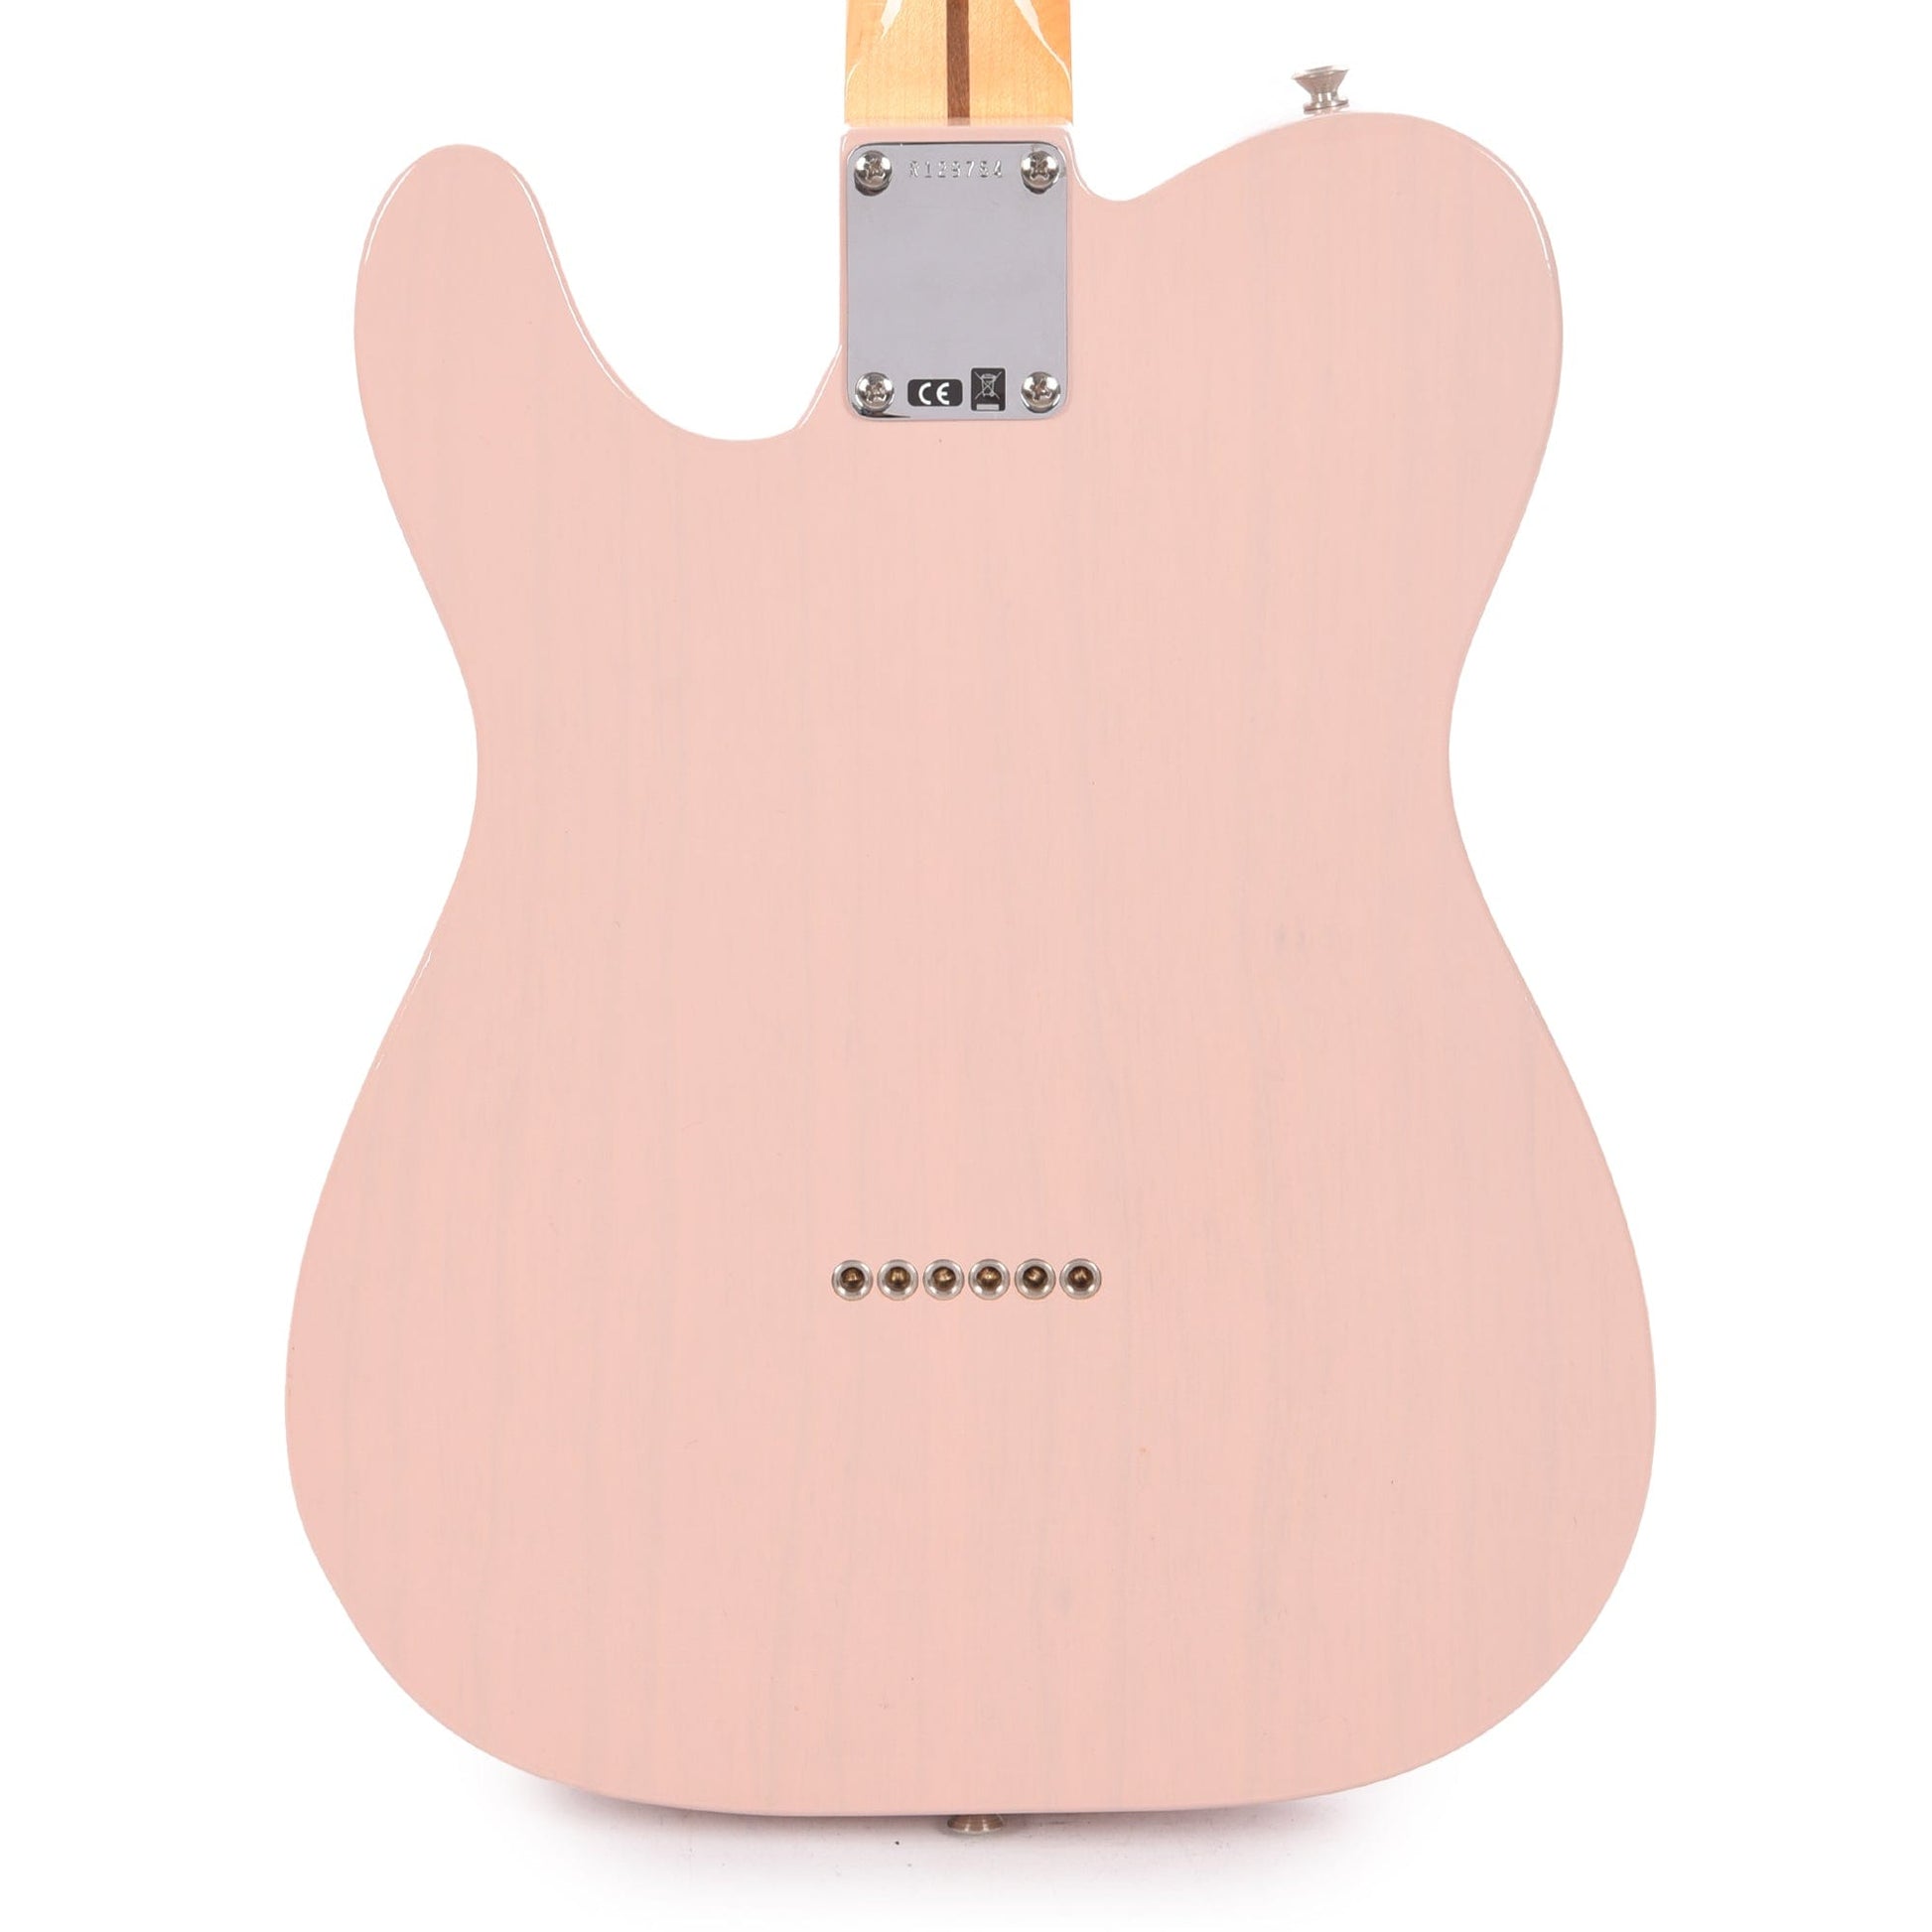 Fender Custom Shop 1955 Telecaster "Chicago Special" Deluxe Closet Classic Faded Trans Shell Pink Electric Guitars / Solid Body